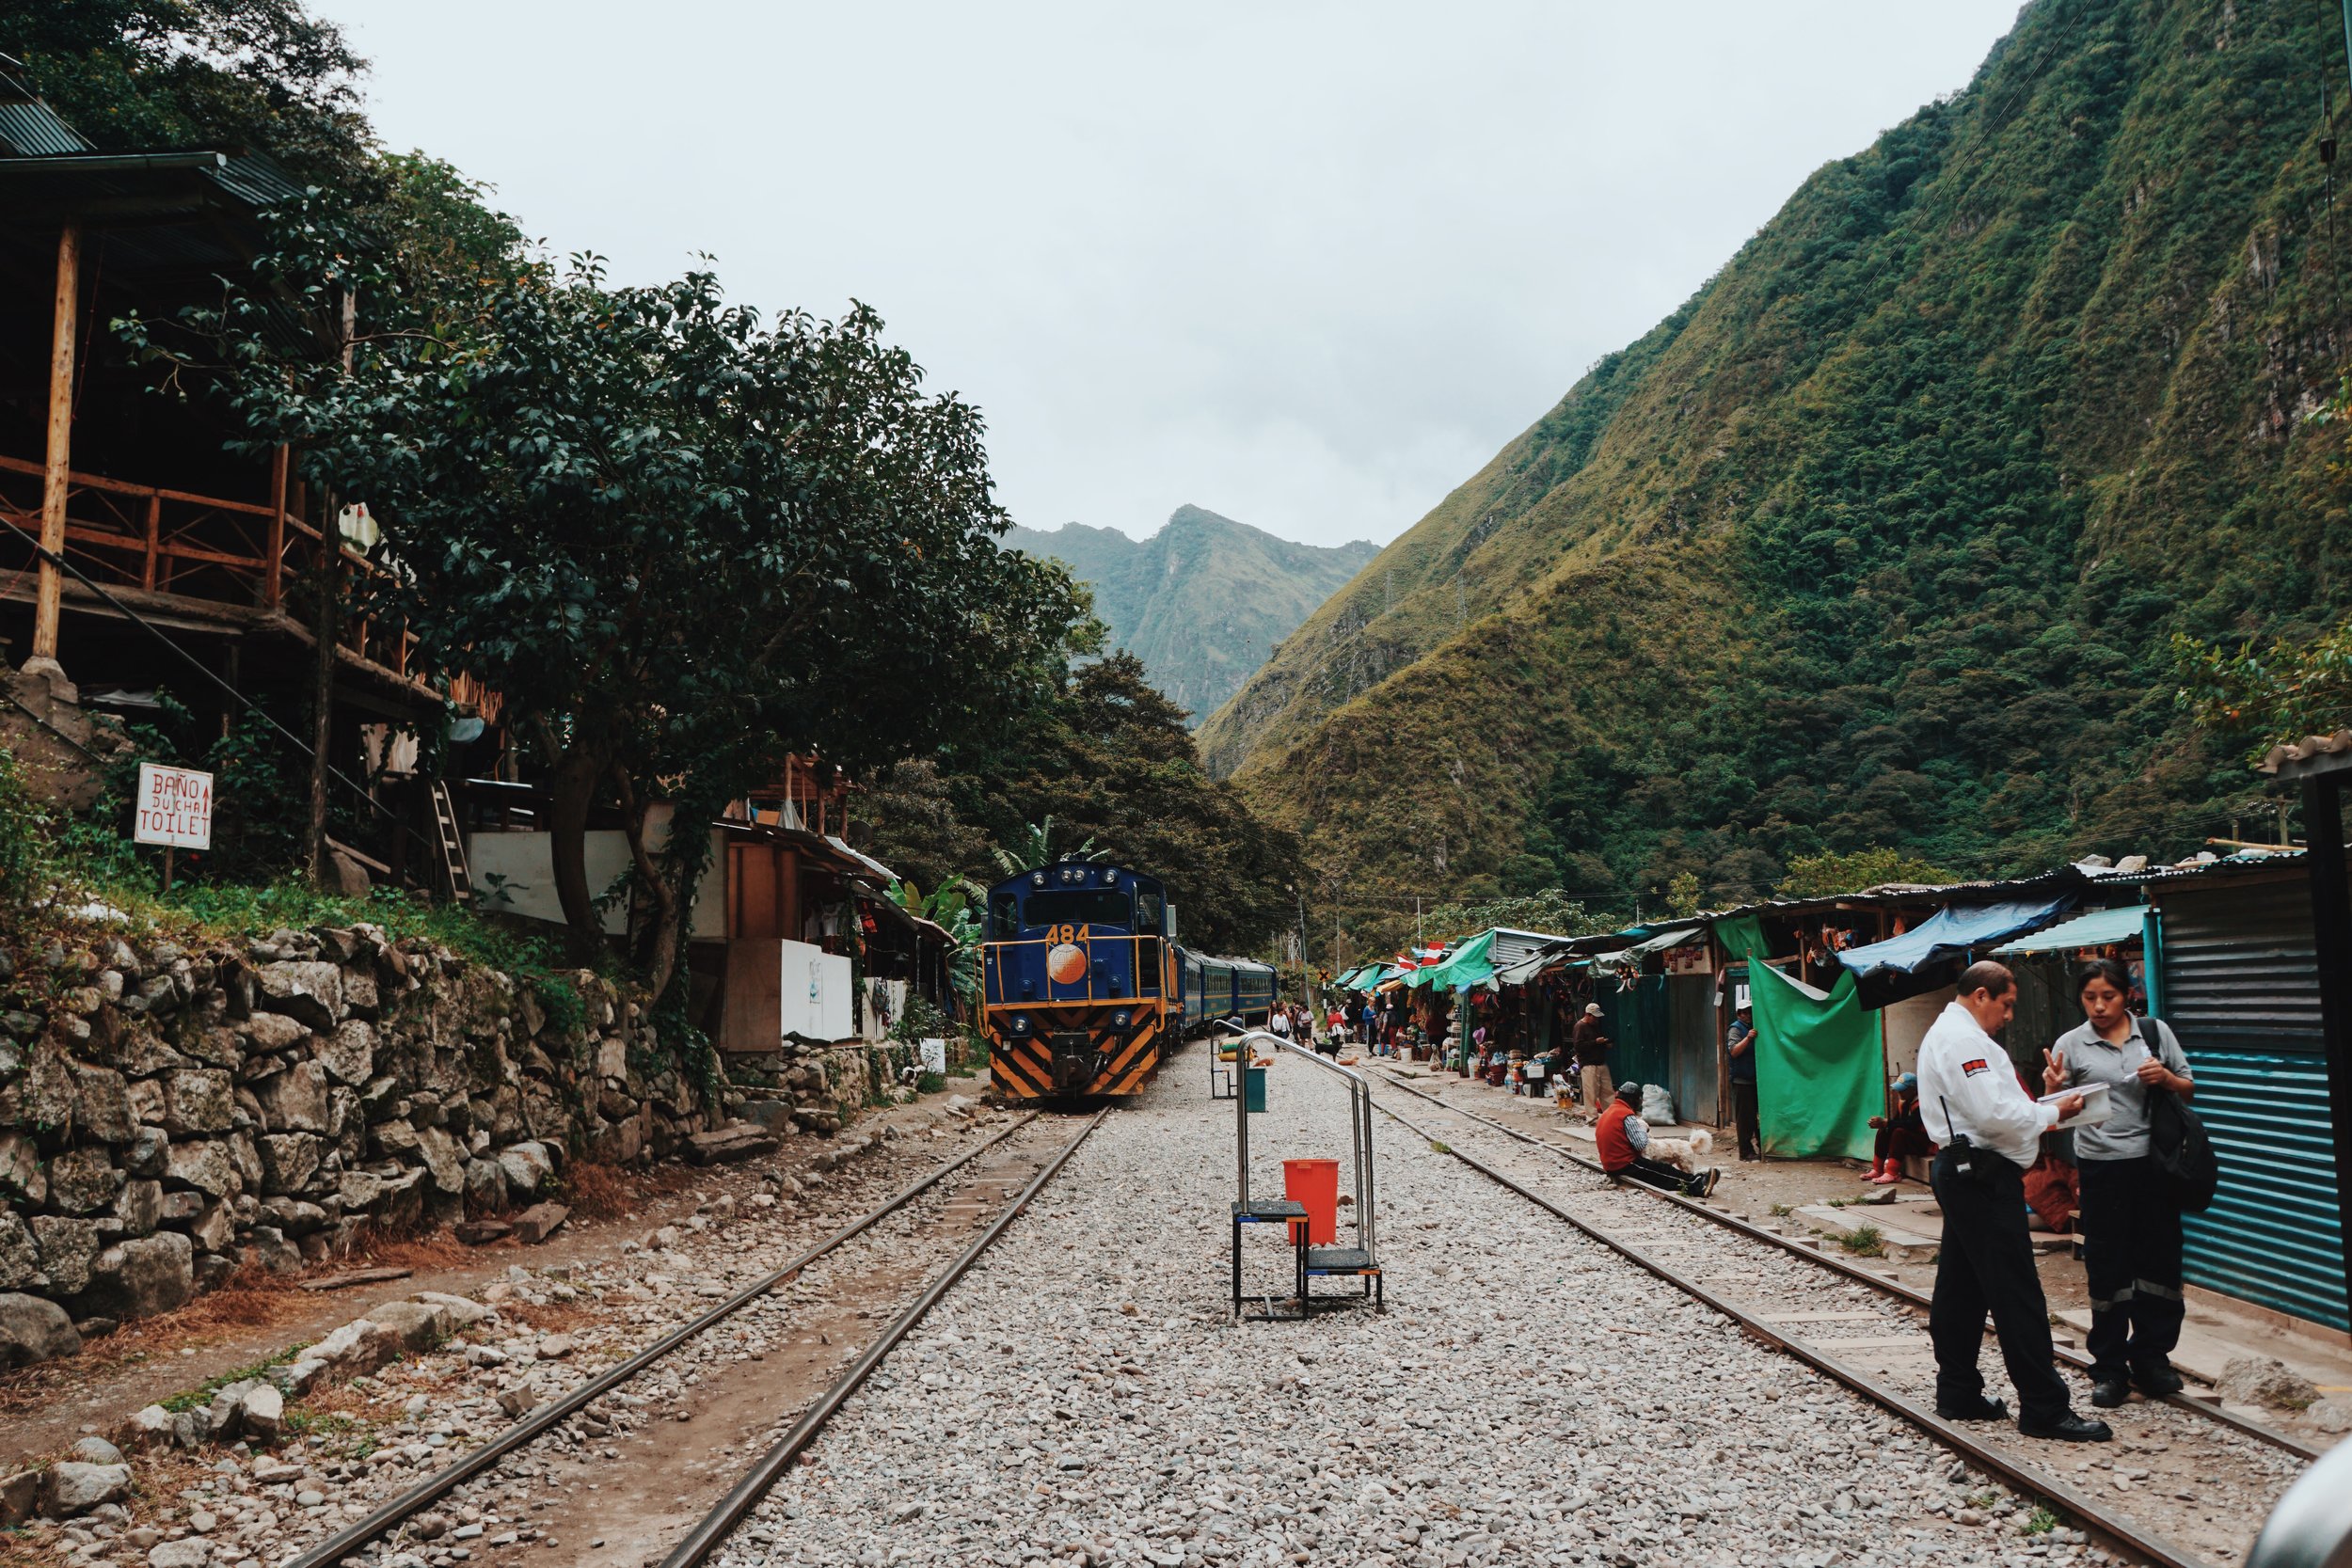  Hidroelectrica Train Station: The start of the (very long) walk along the train tracks to Aguas Calientes. 